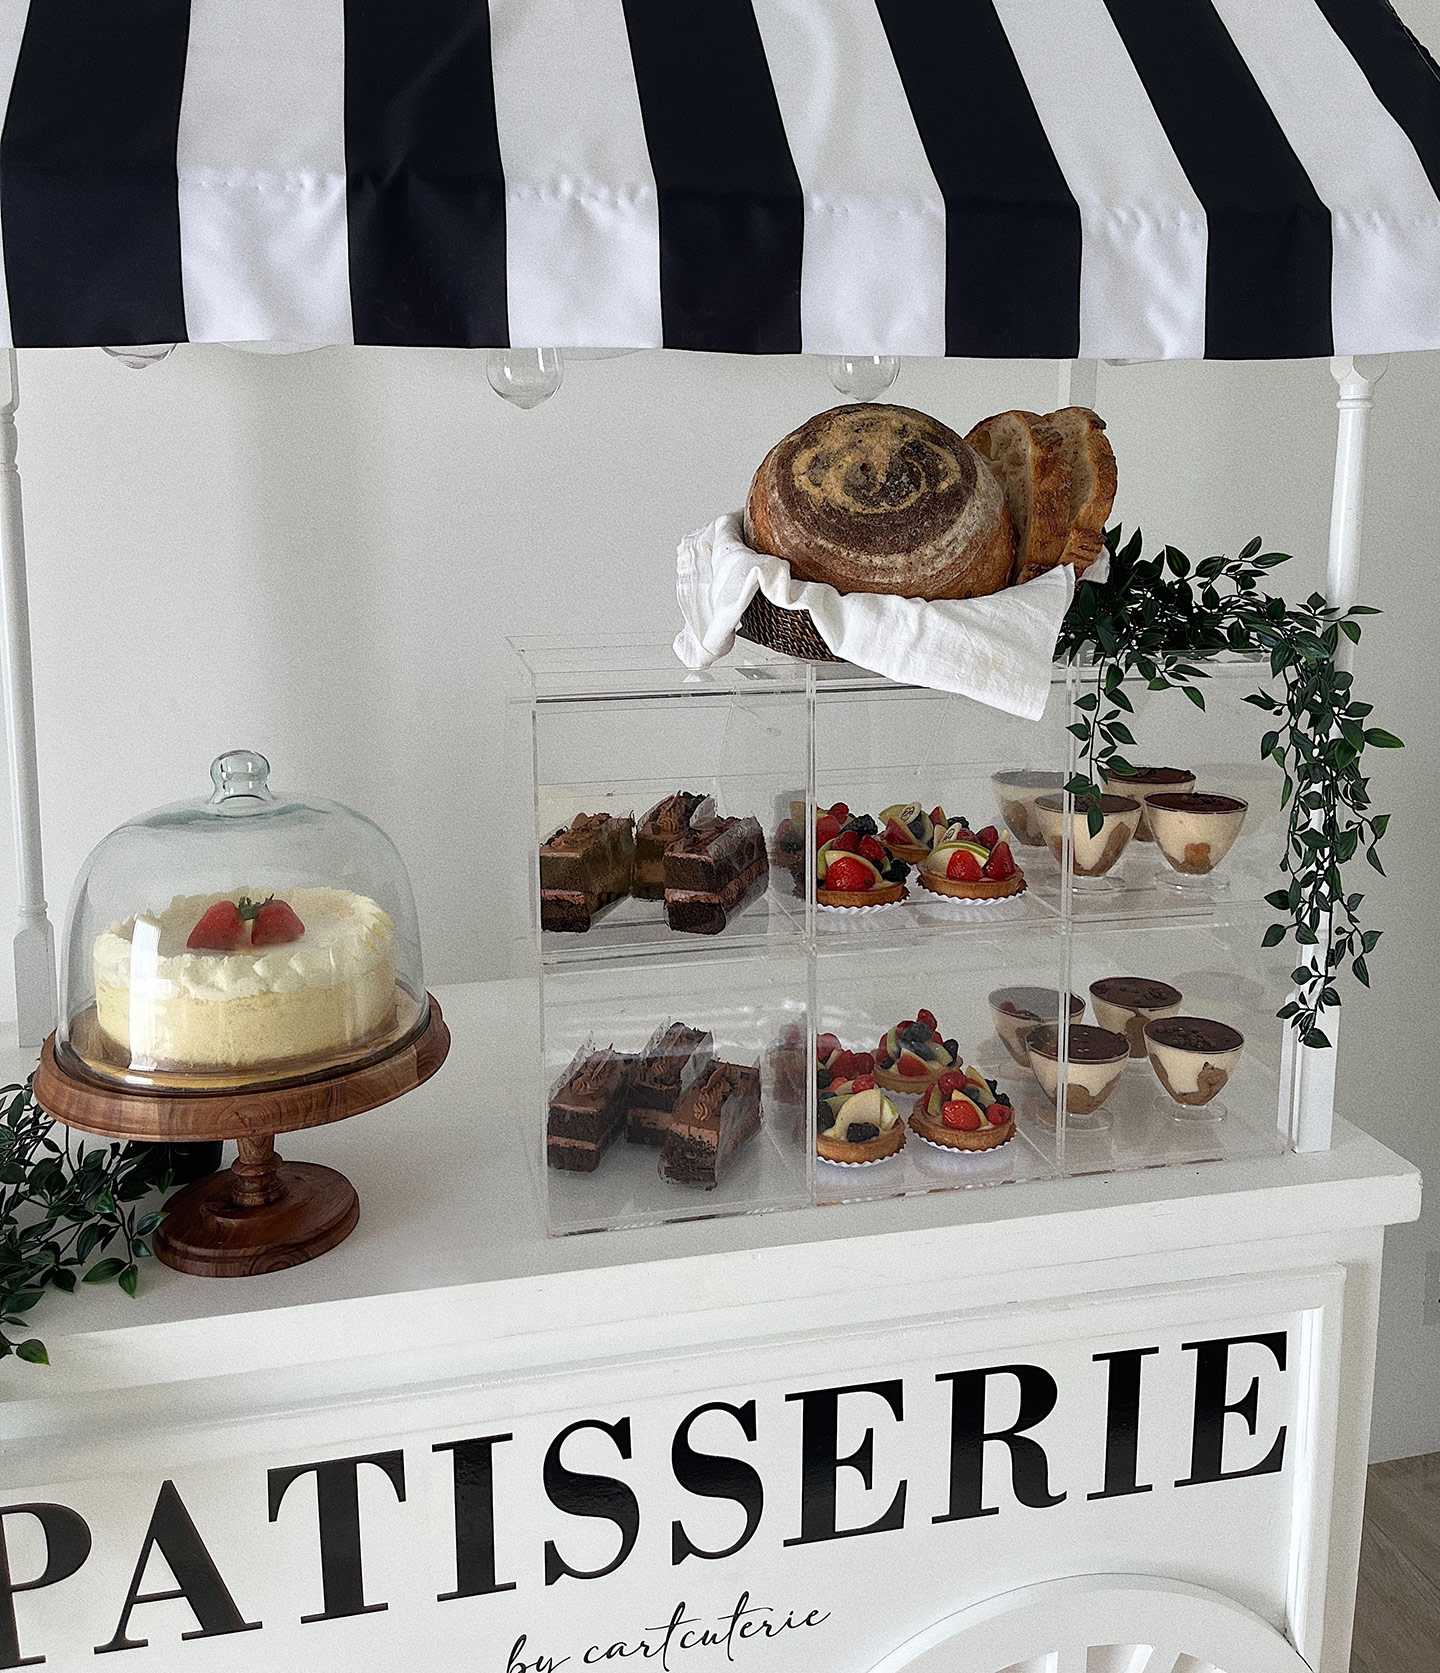 Cartcuterie's French Patisserie food options closeup